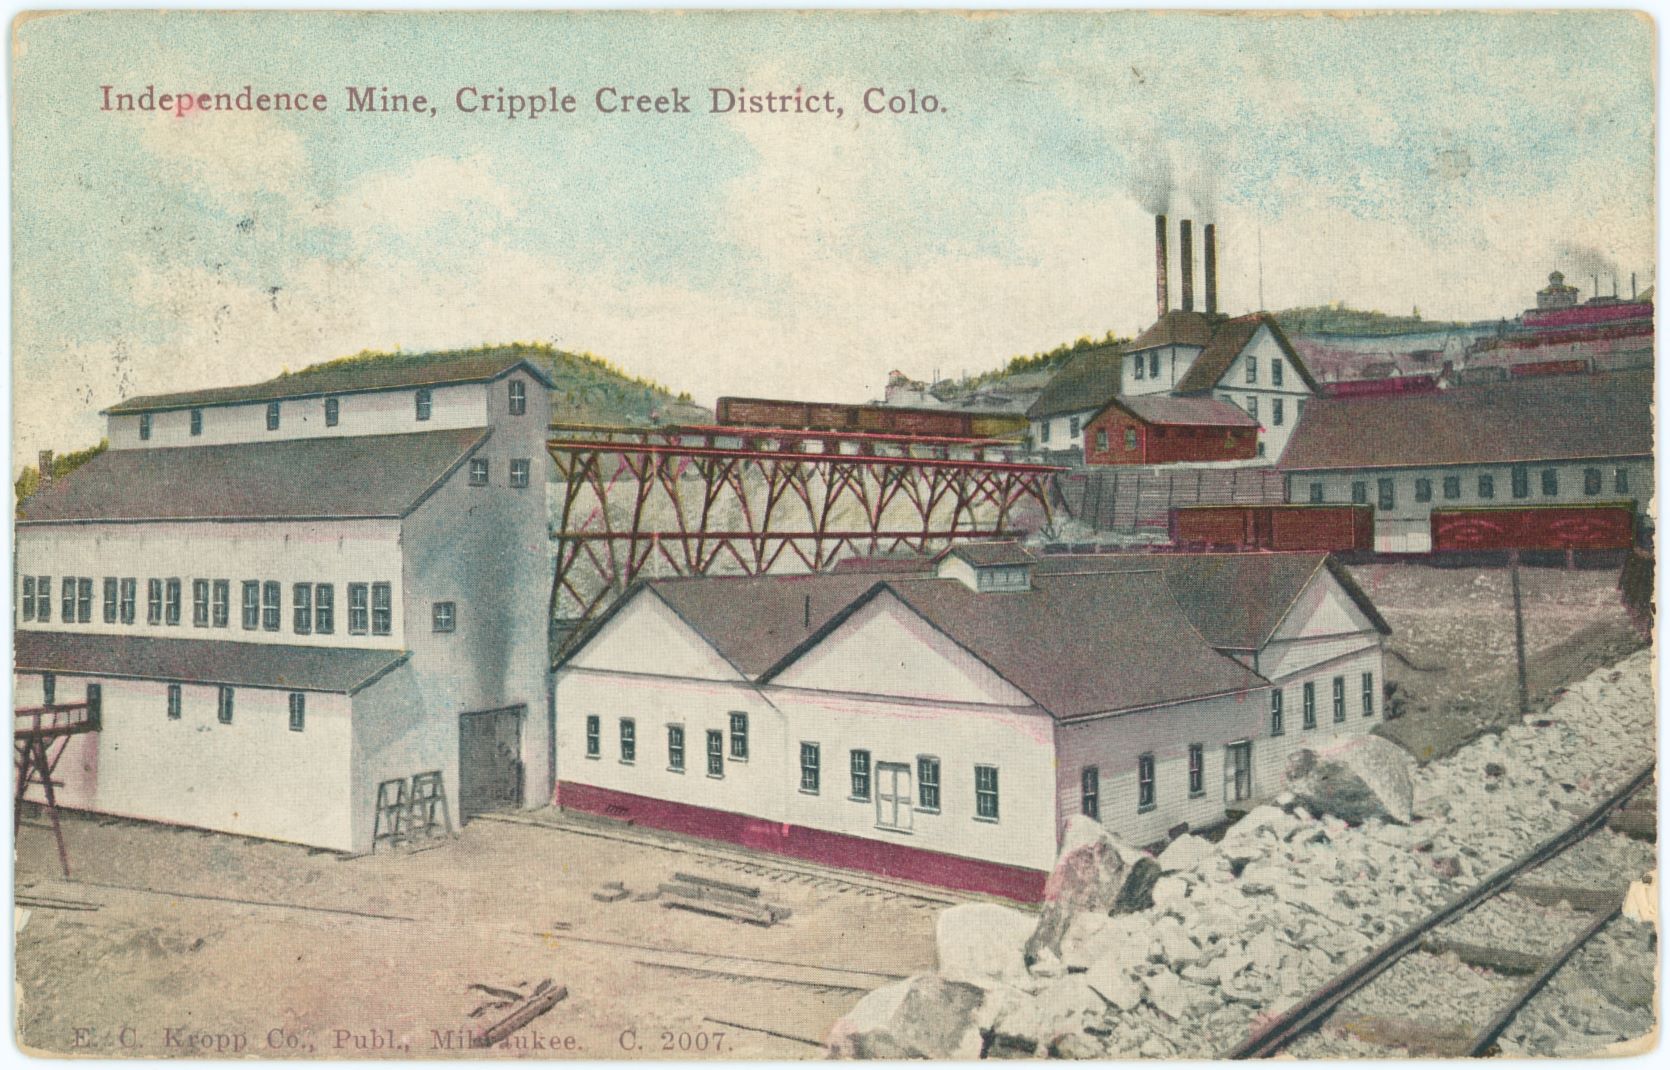 Independence Mine, Cripple Creek District, Colo.